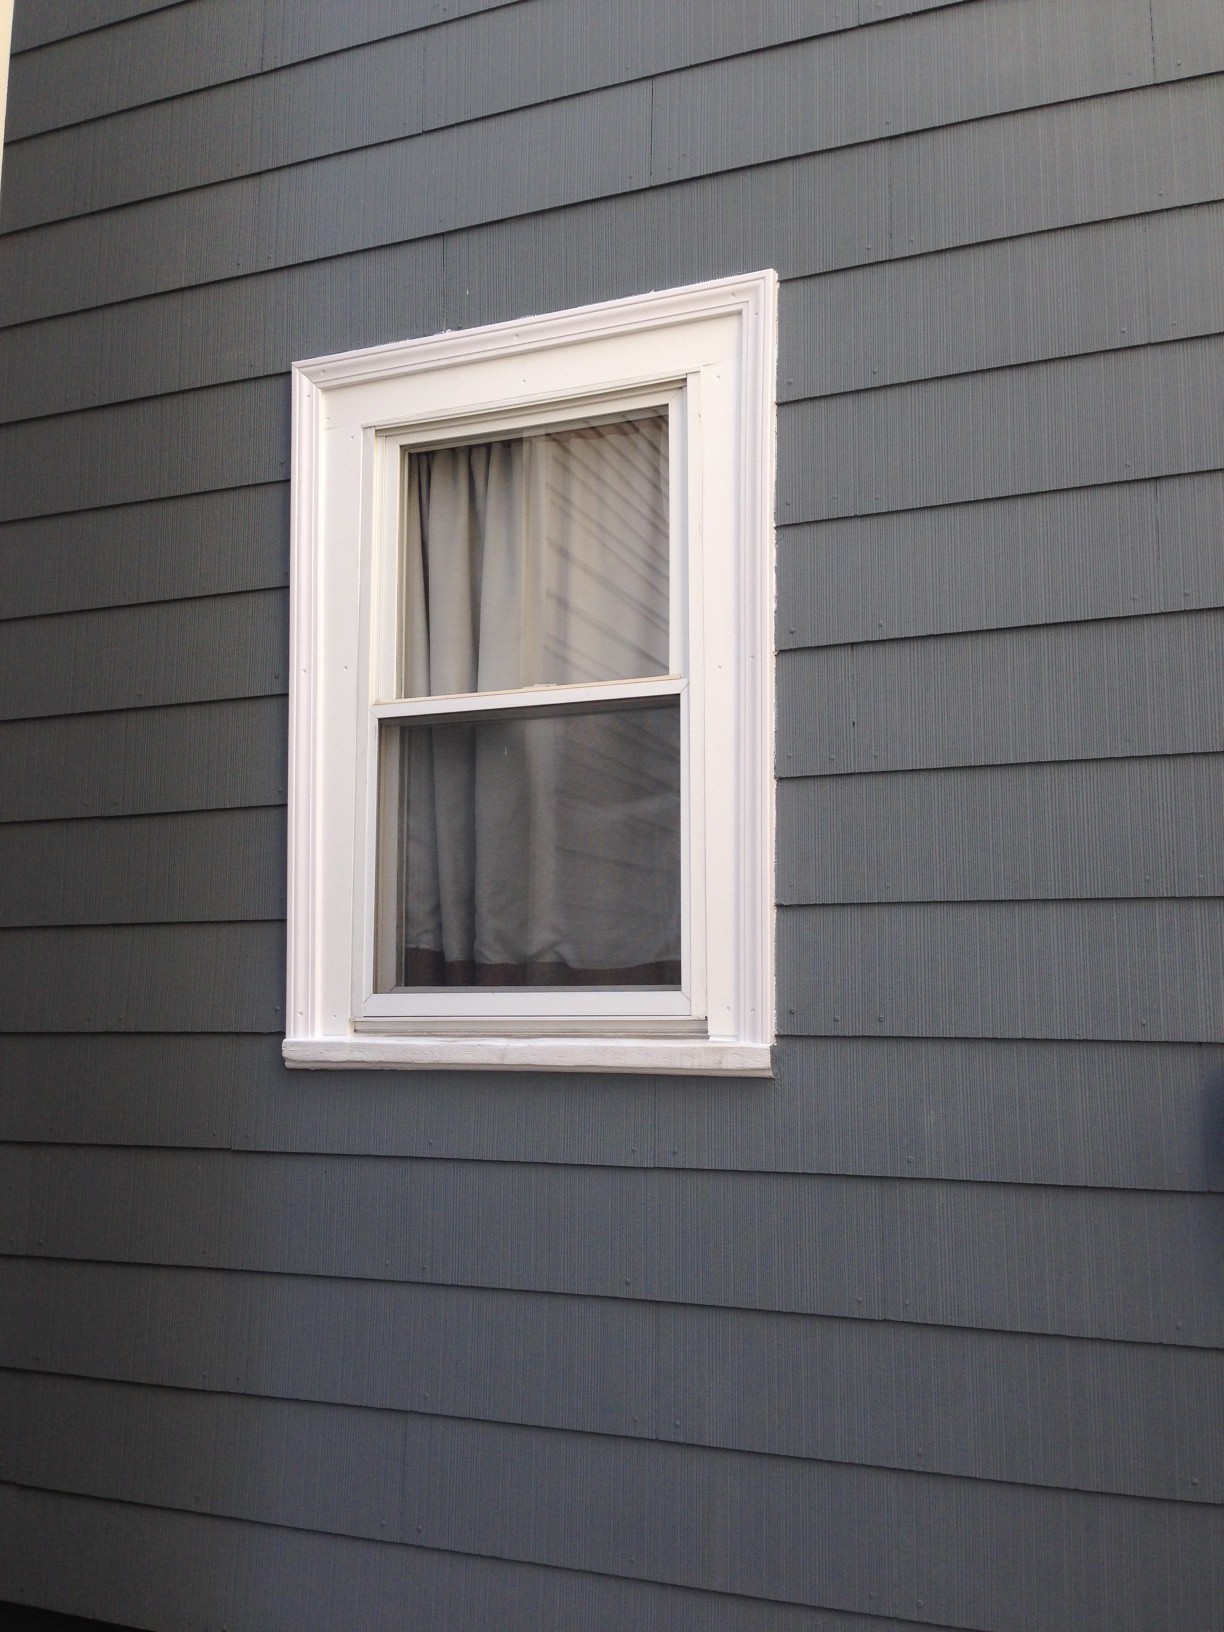 exterior window trim the finished product! MIJXZVS